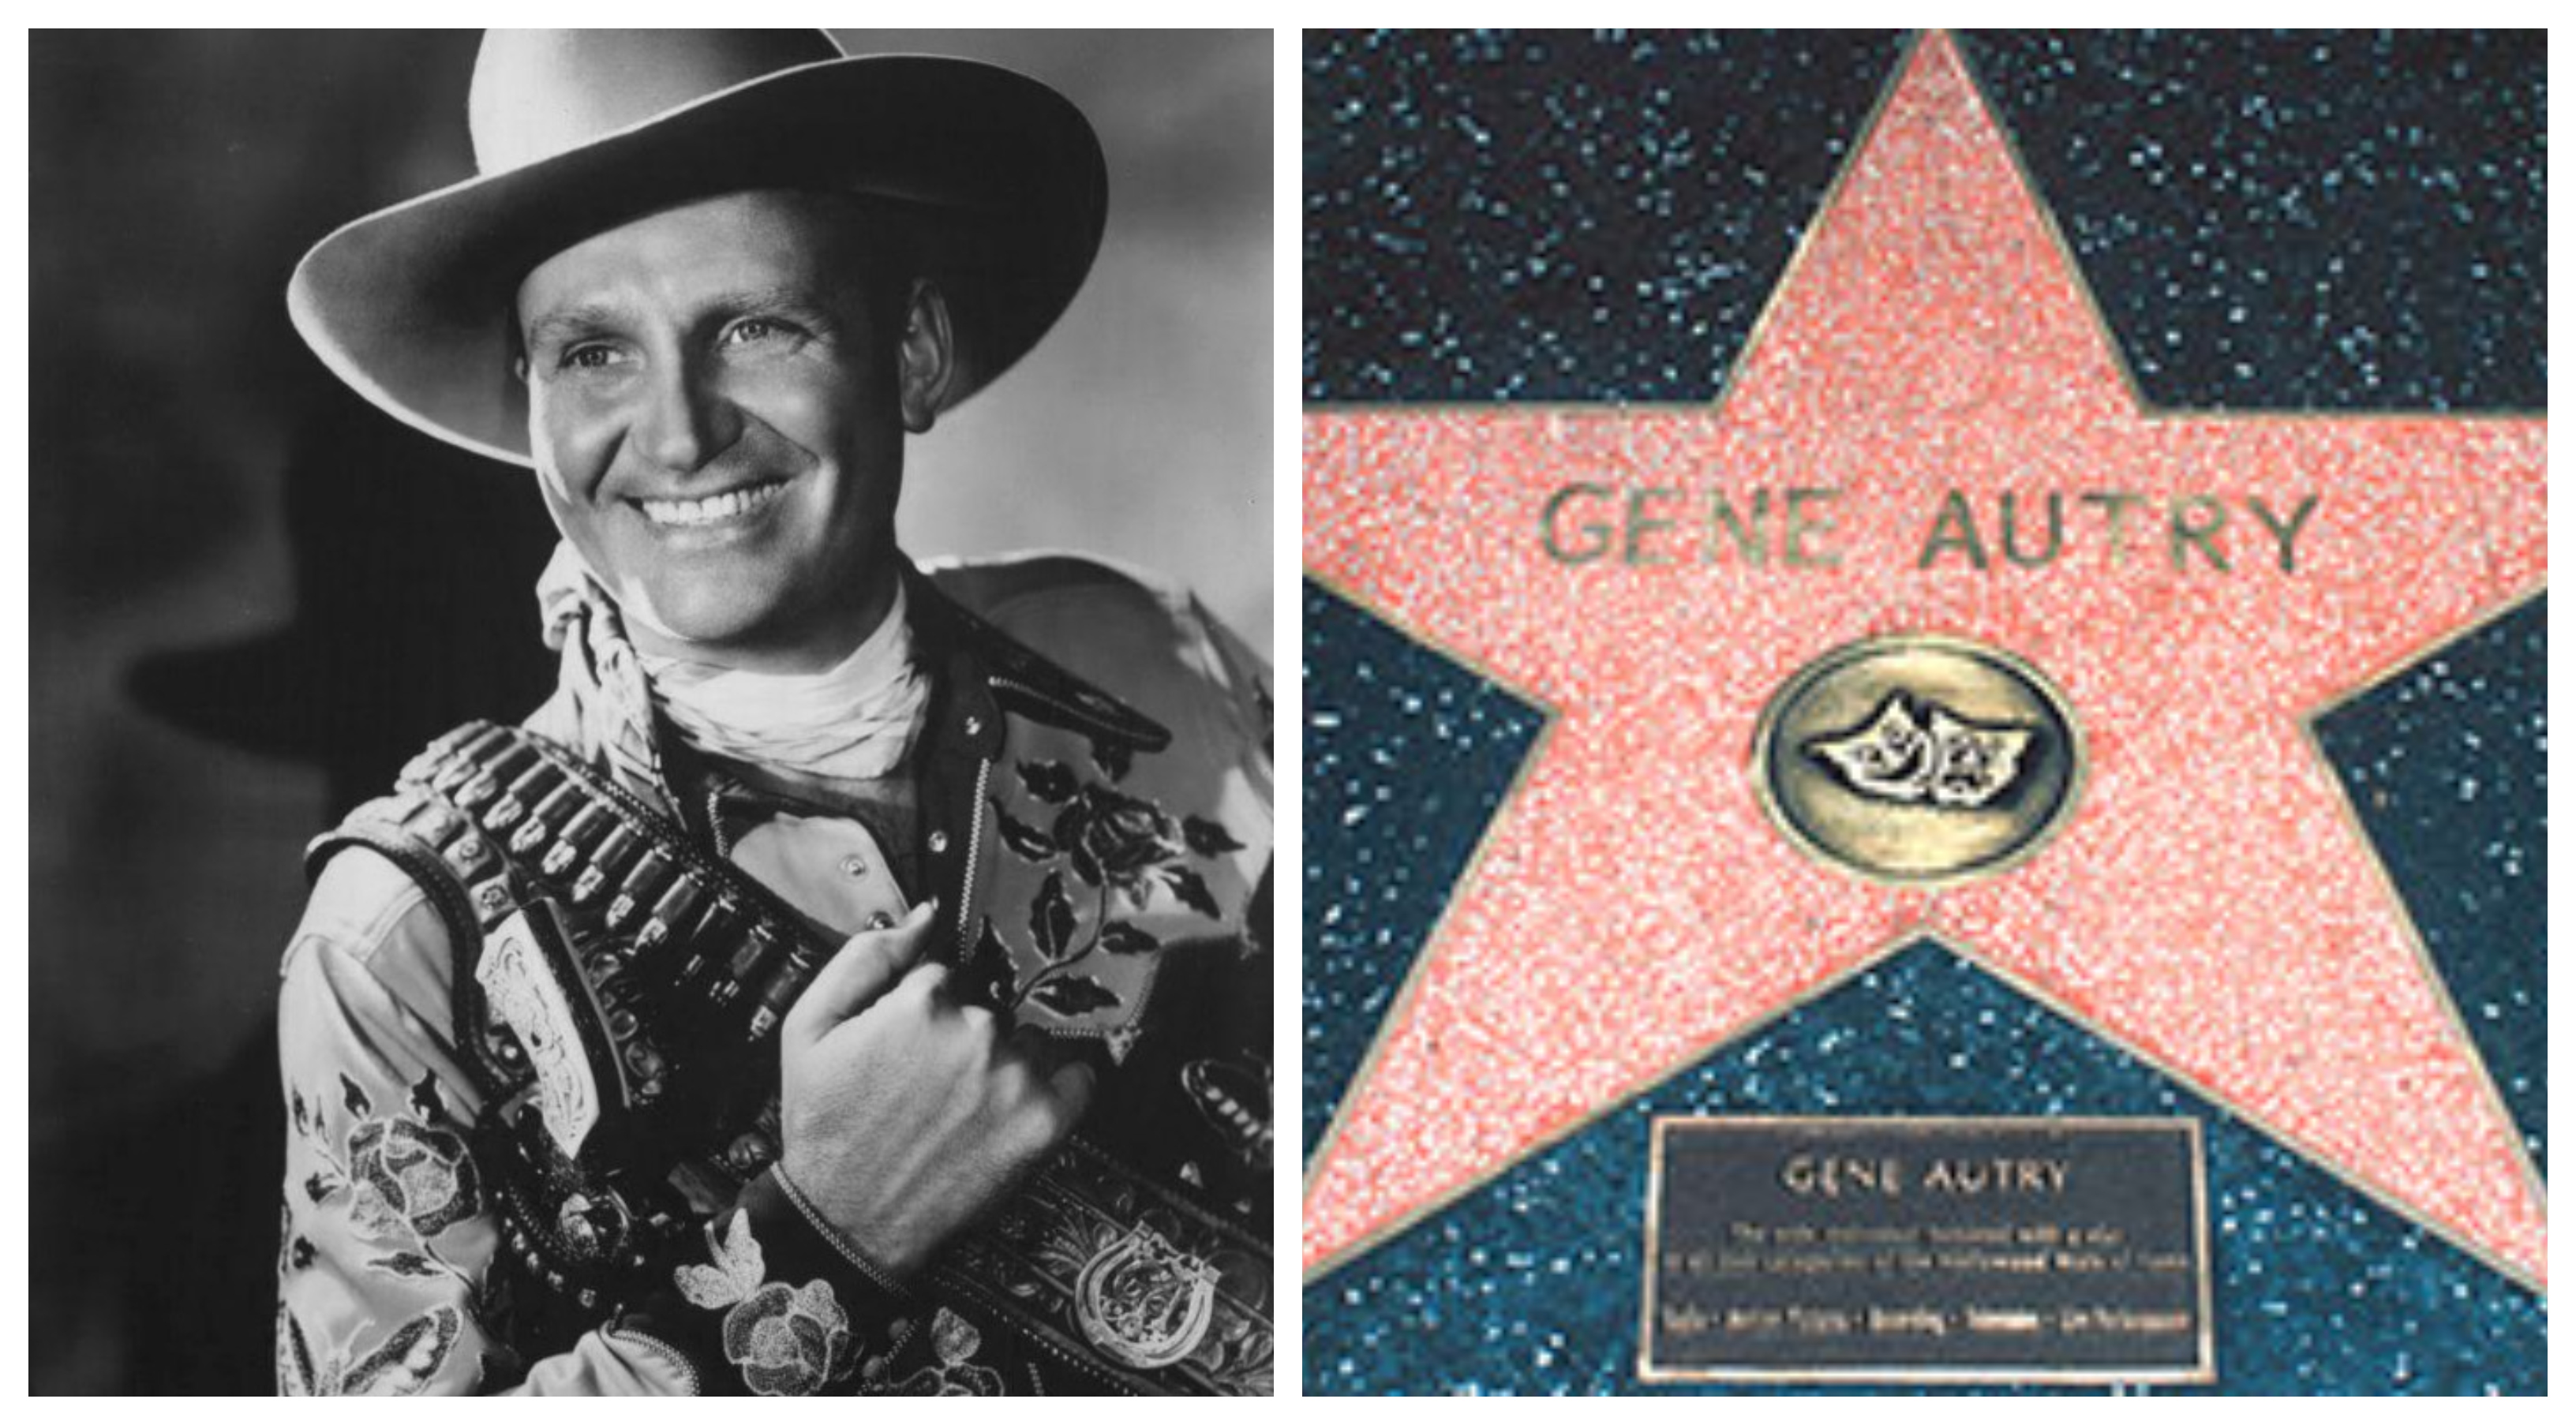 Who Wrote The Biggest Hit Of The Performer Who Has Five Stars Along Hollywood Boulevard?